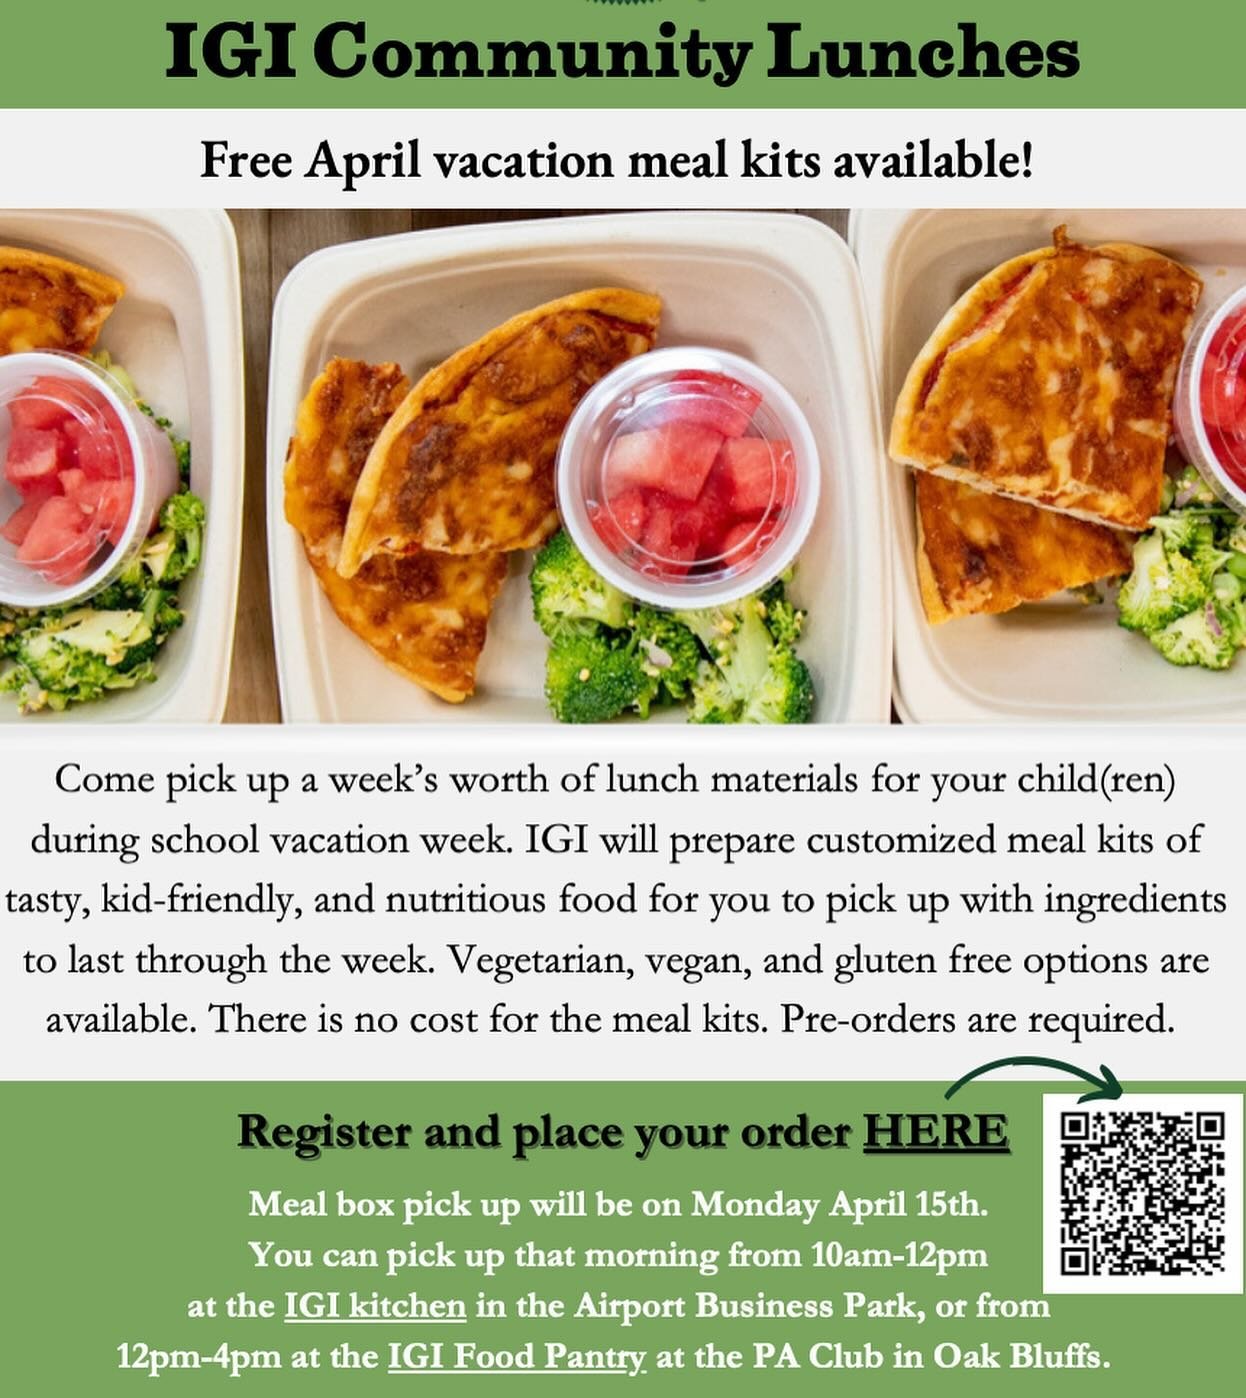 We will have free meal kits available next week during school vacation week. To pre-order click the link in our bio!